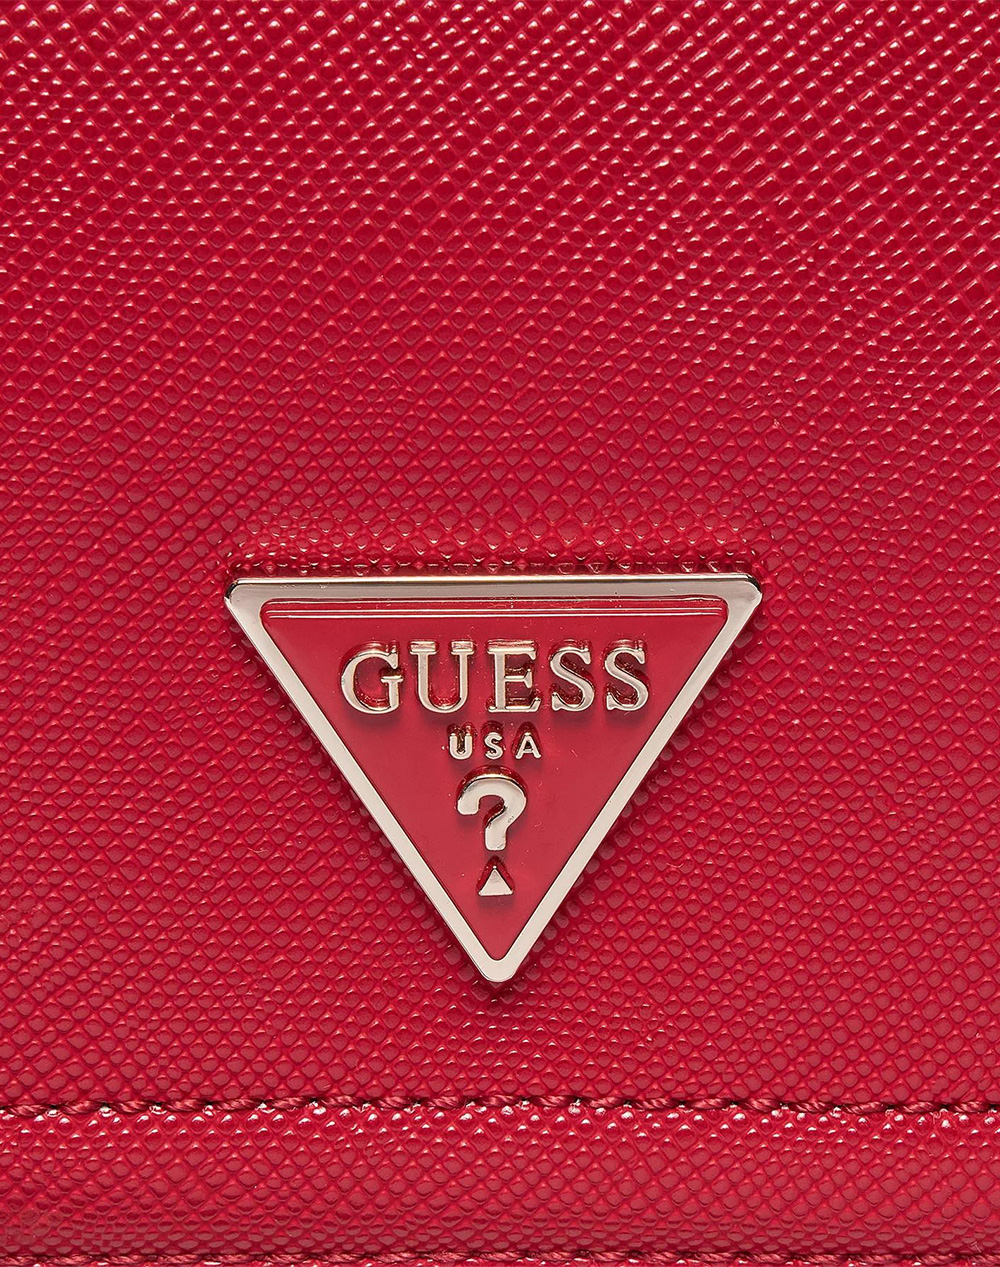 GUESS NOELLE CONVERTIBLE XBODY FLAP WOMENS BAG (Dimensions: 24 x 15 x 7 cm)